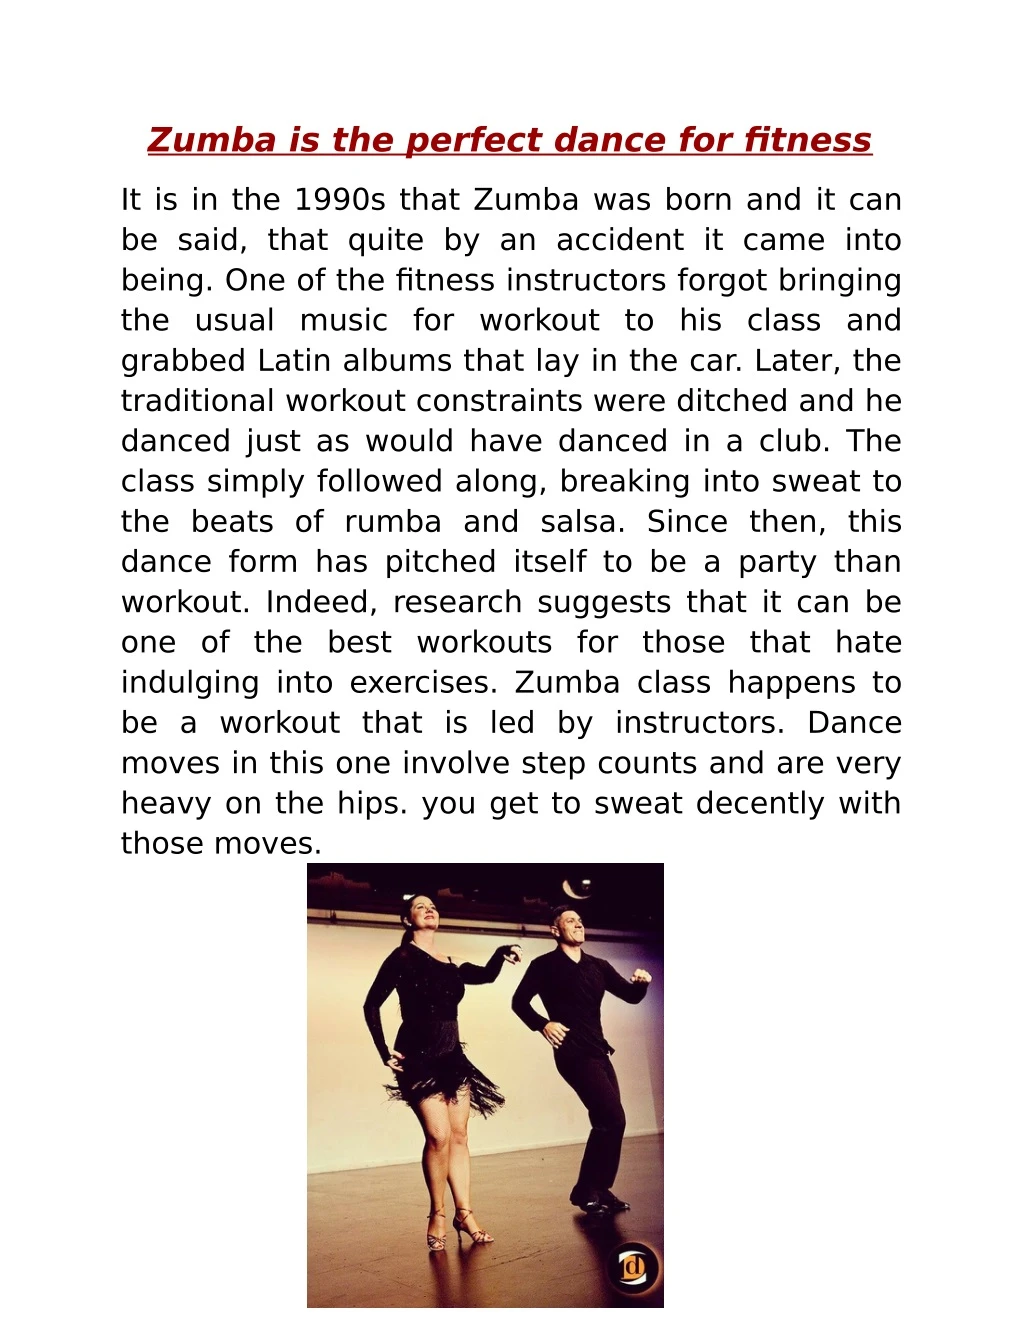 zumba is the perfect dance for fitness